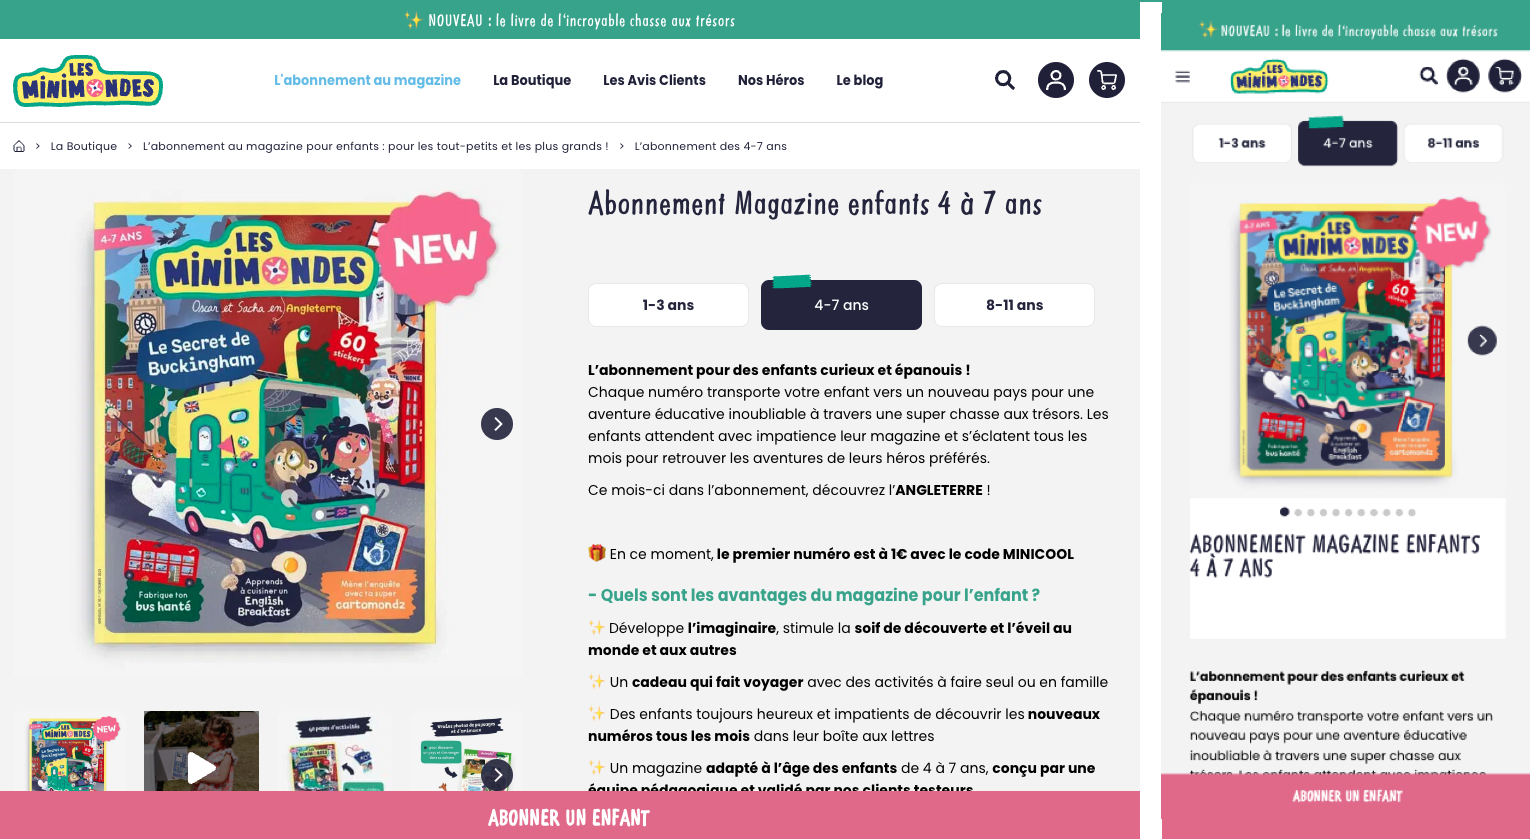 <img alt="" src="/user/pages/01.use-cases/01.lesminimondes-180-added-to-cart-on-a-product-page/LesMiniMondes_Screenshot_after_webyn.png?title" width="1530" height="839" style="--aspect-ratio: 1530/839;" />